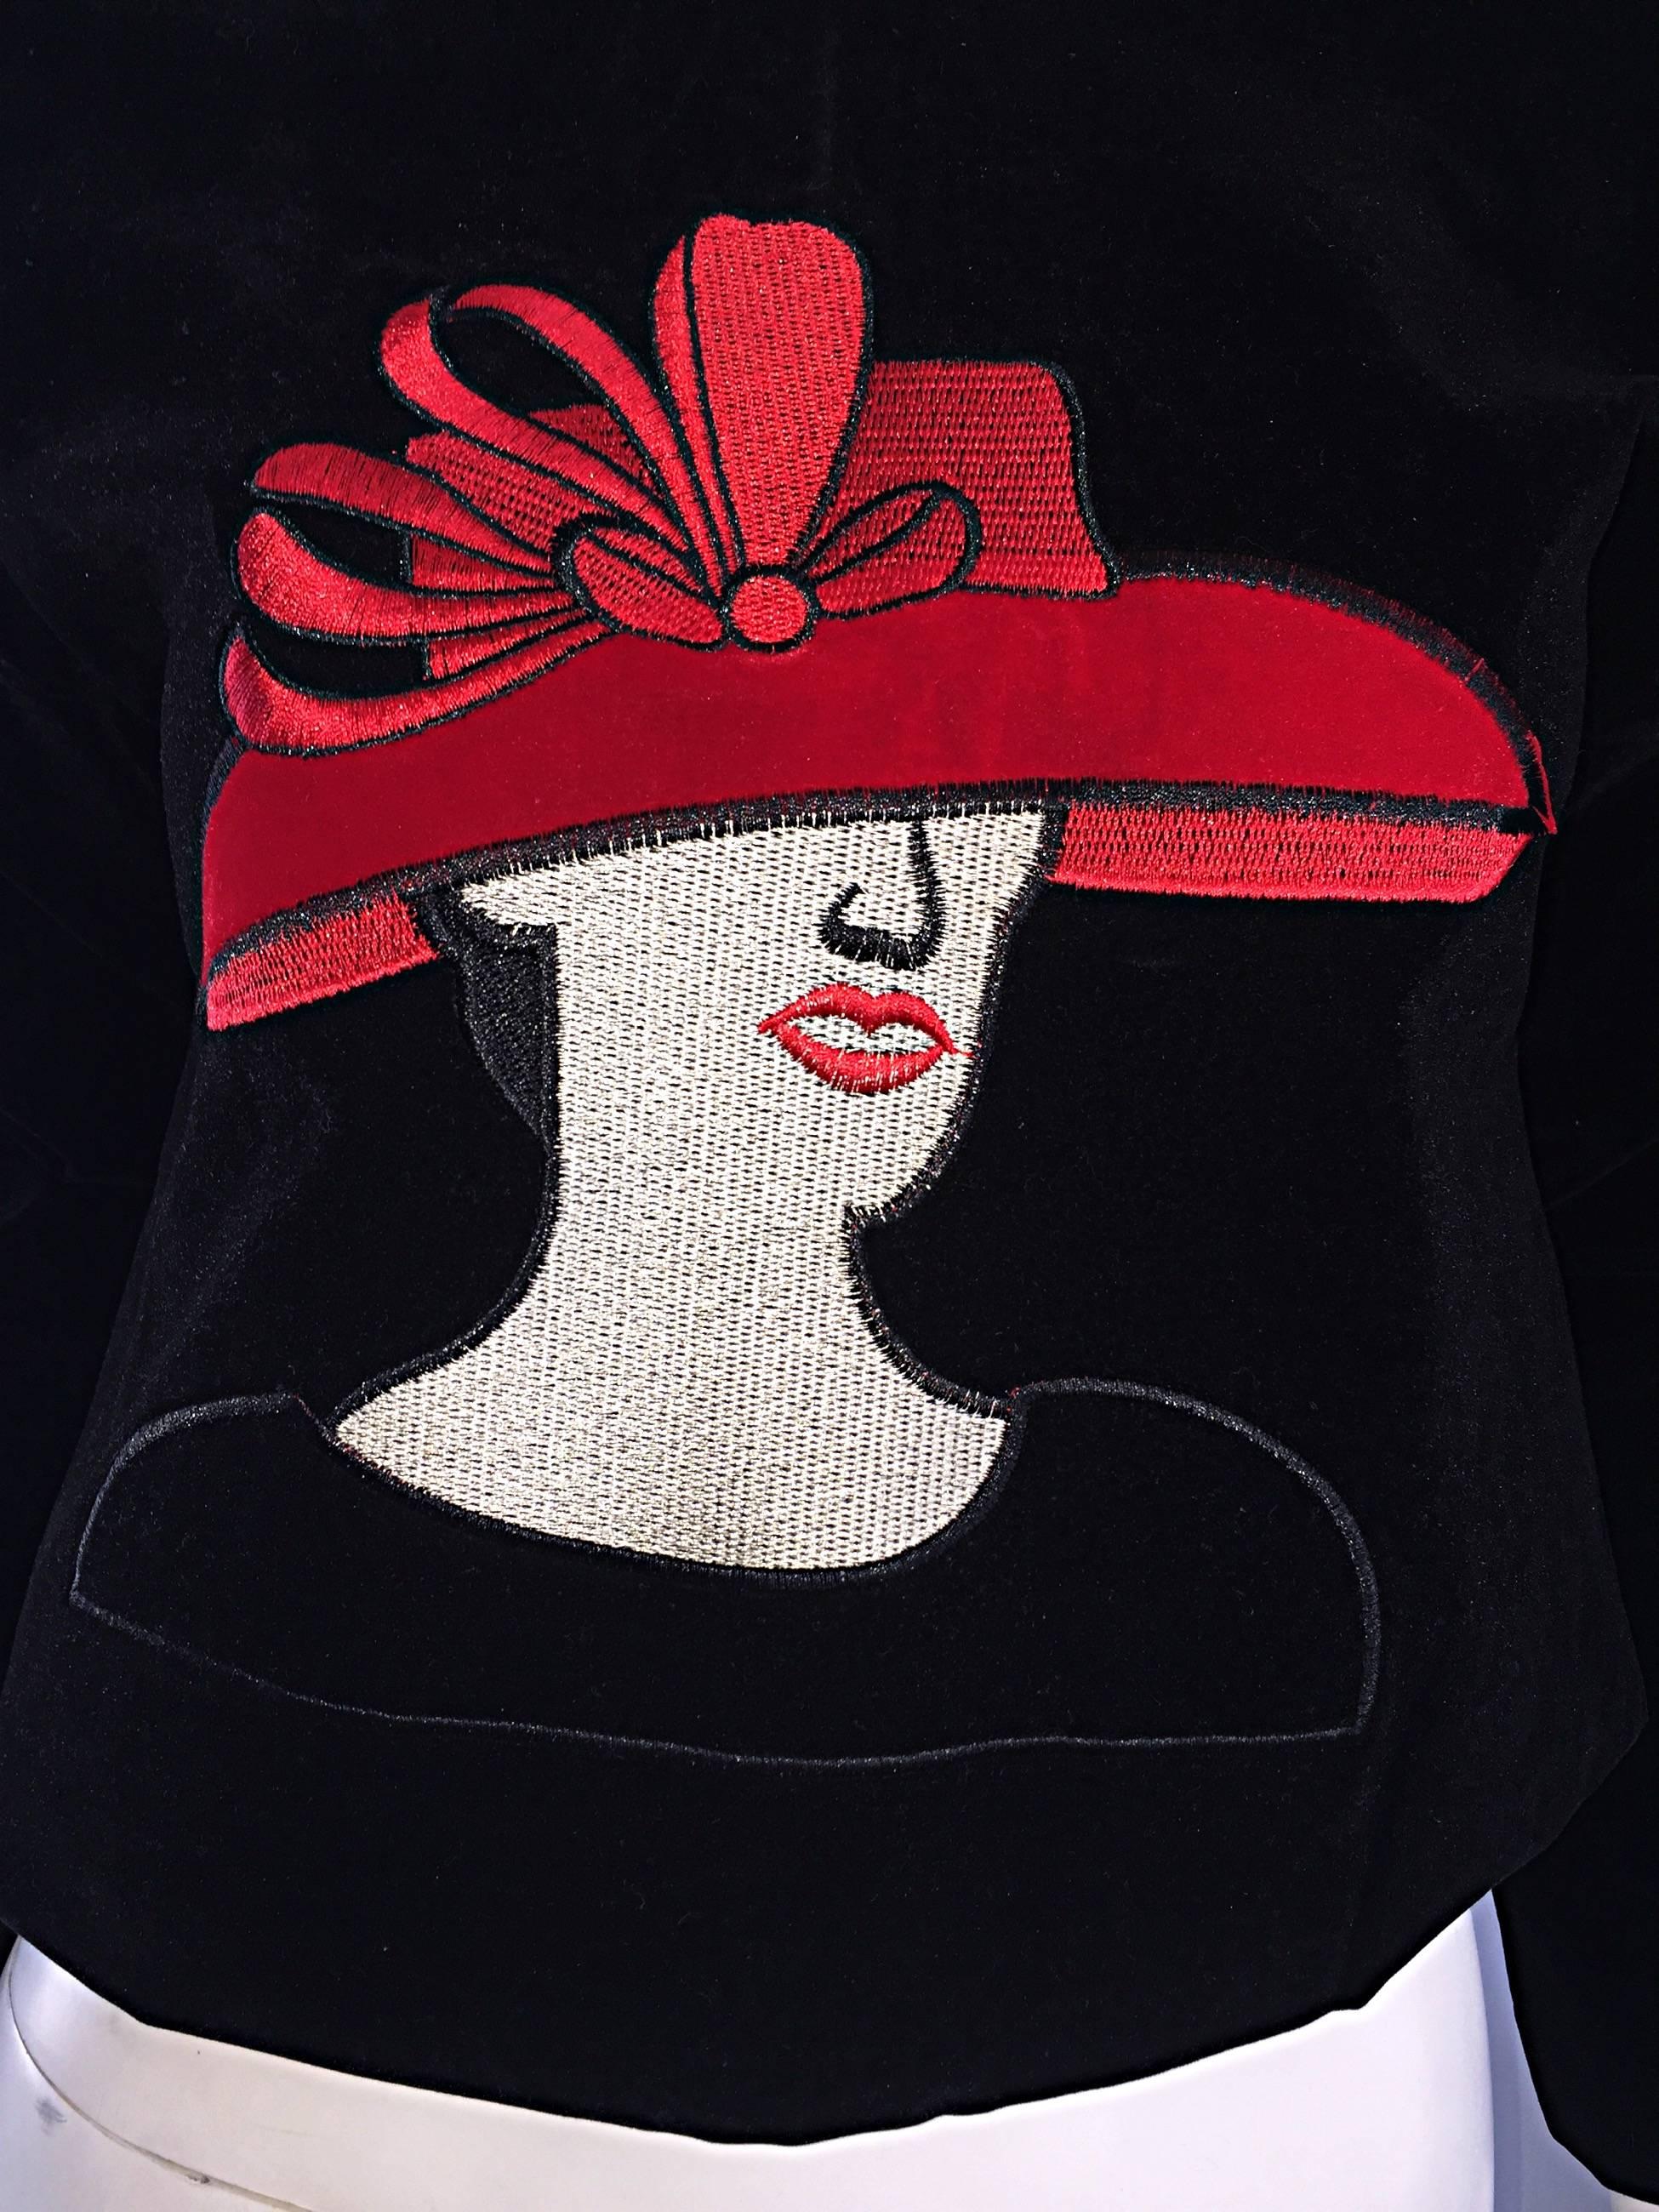 1980s Vintage 80s Novelty Velvet Crop Top Blouse w/ Lady in Red Hat  In Excellent Condition For Sale In San Diego, CA